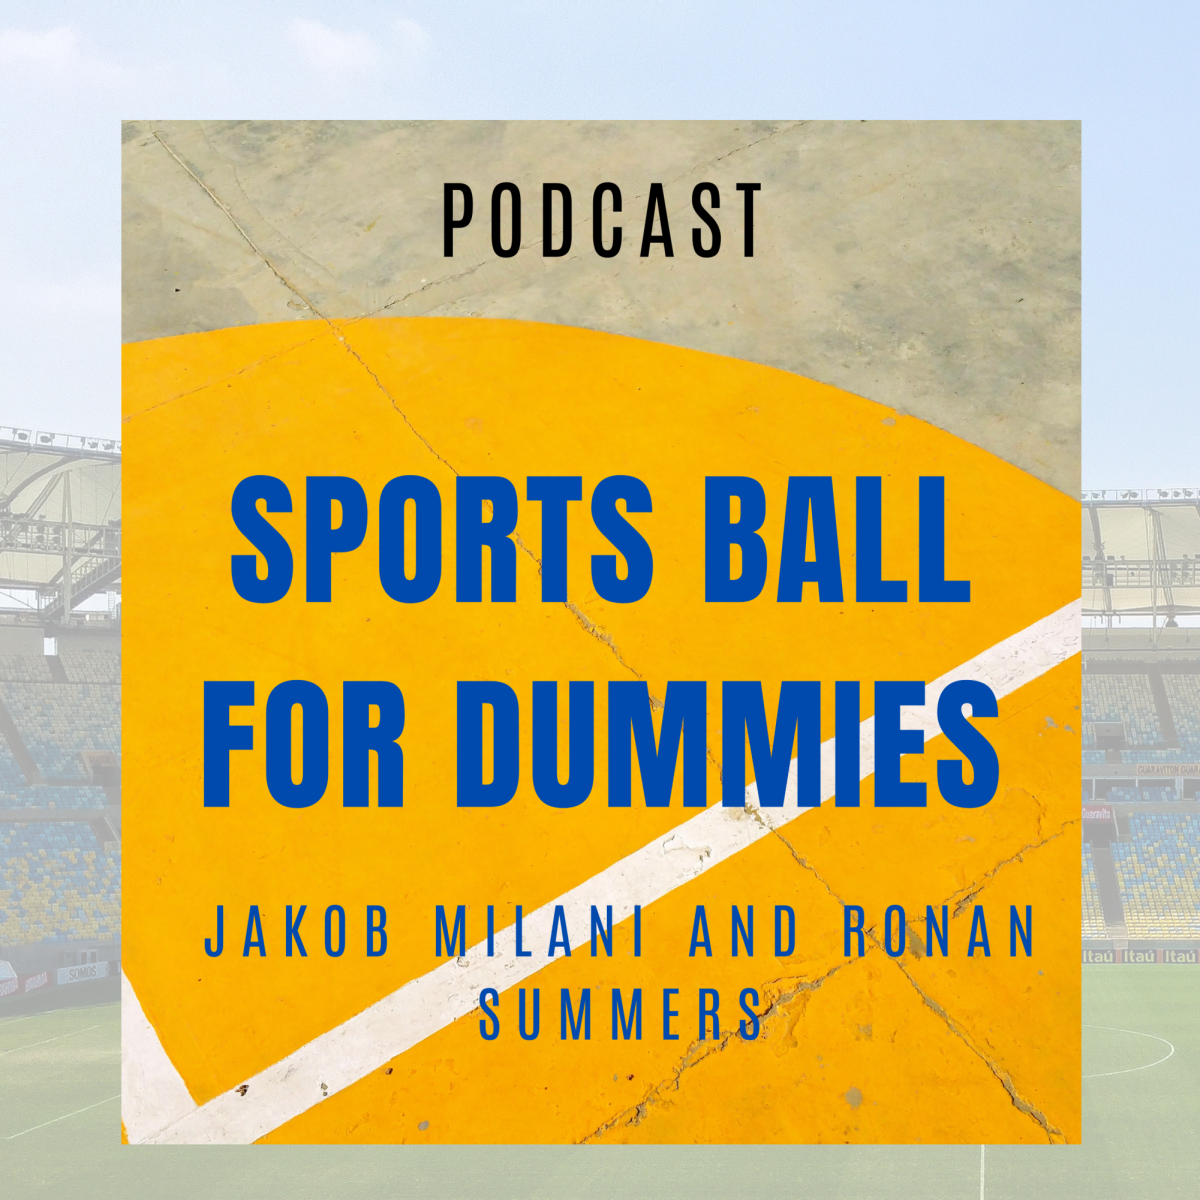 PODCAST: Sports Ball for Dummies, Ep. 2